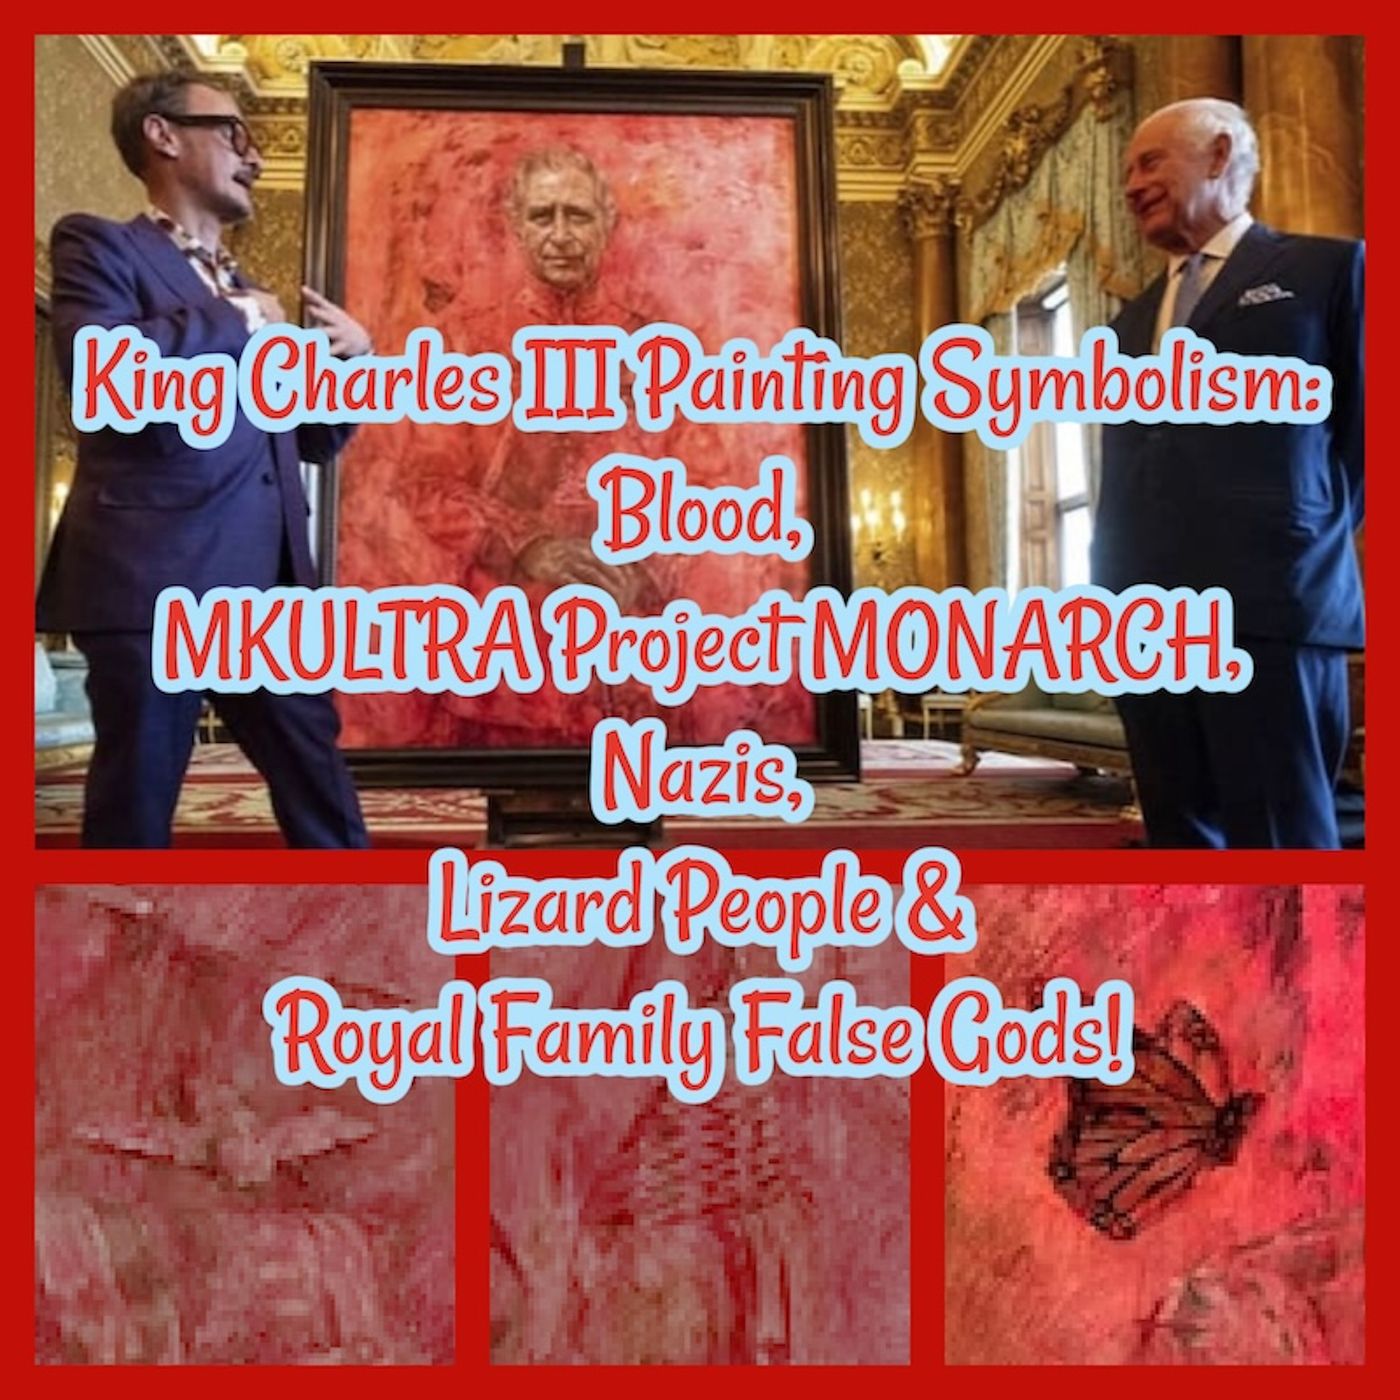 King Charles III Painting Symbolism: Blood, MKULTRA Project MONARCH, Nazis, Lizard People & Royal Family False Gods!